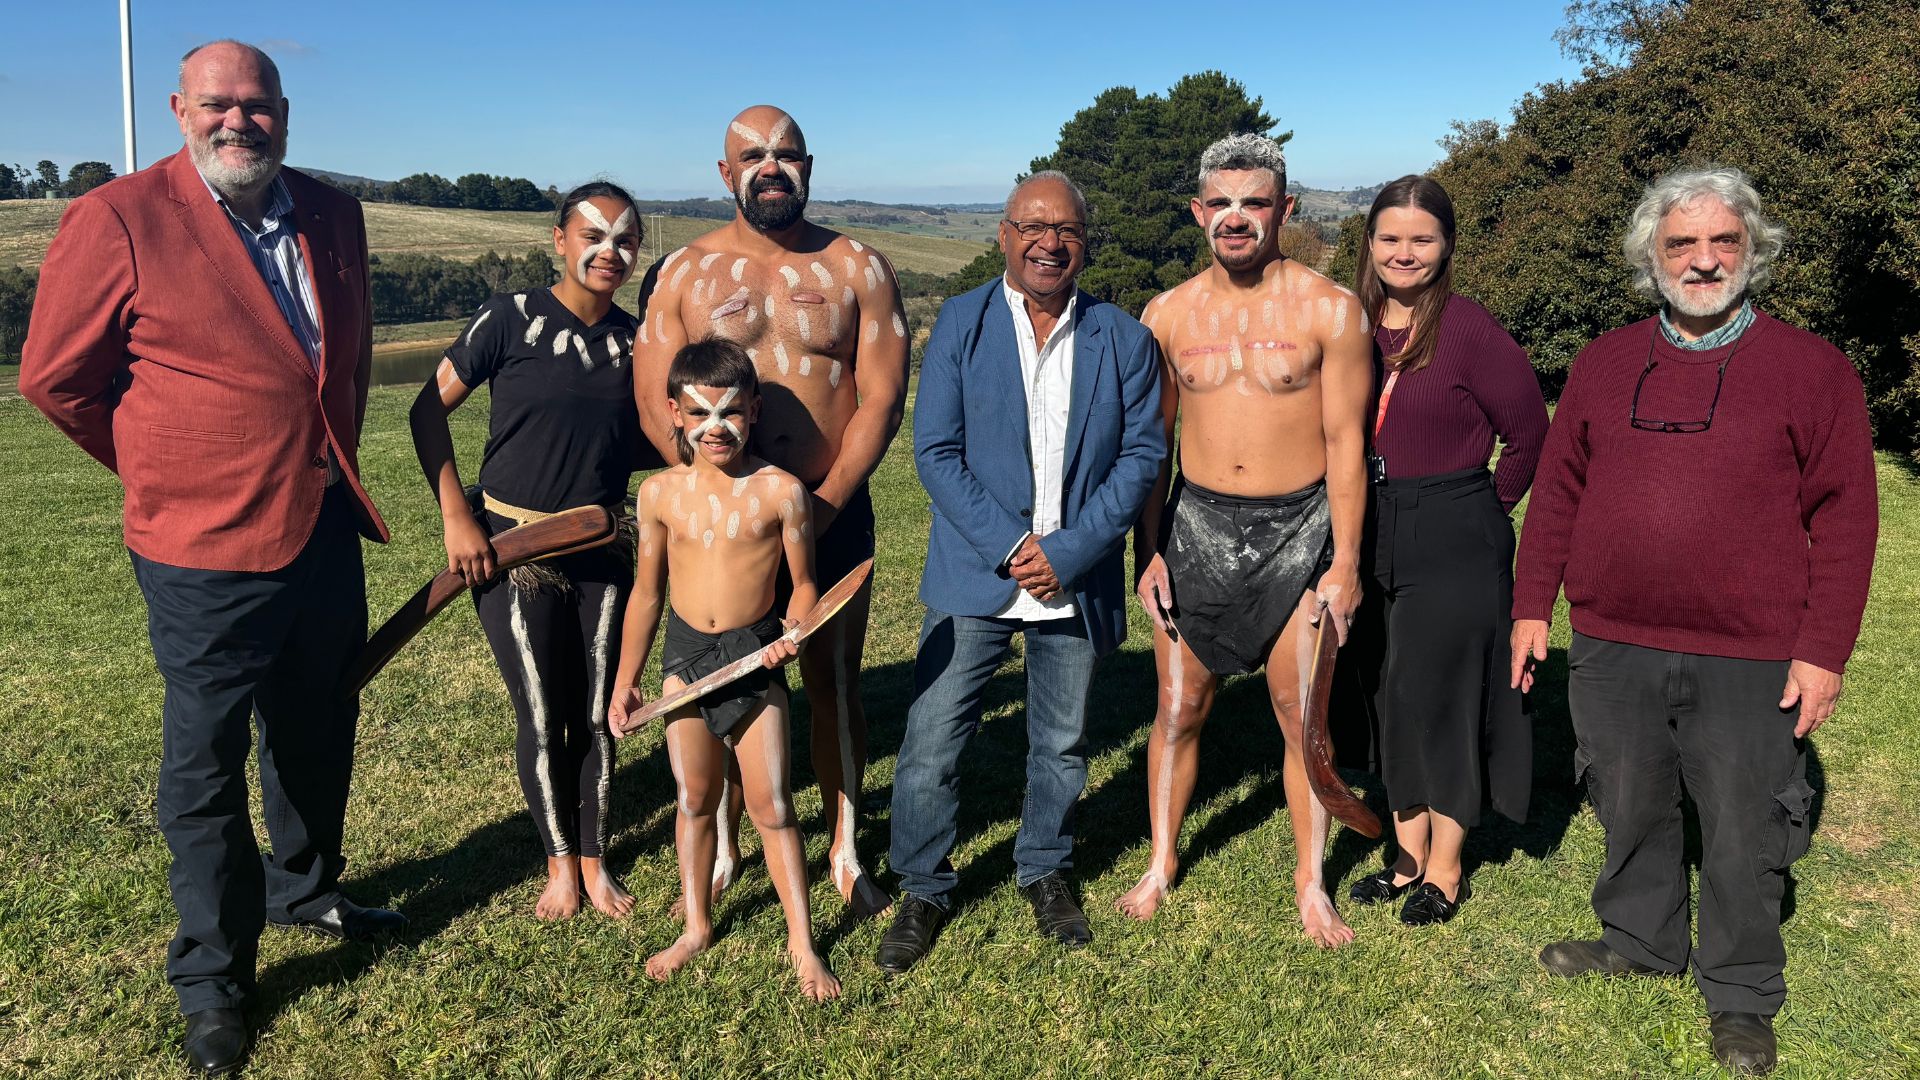 First Nations ‘Winhangarra’ event holds important place on annual university calendar 